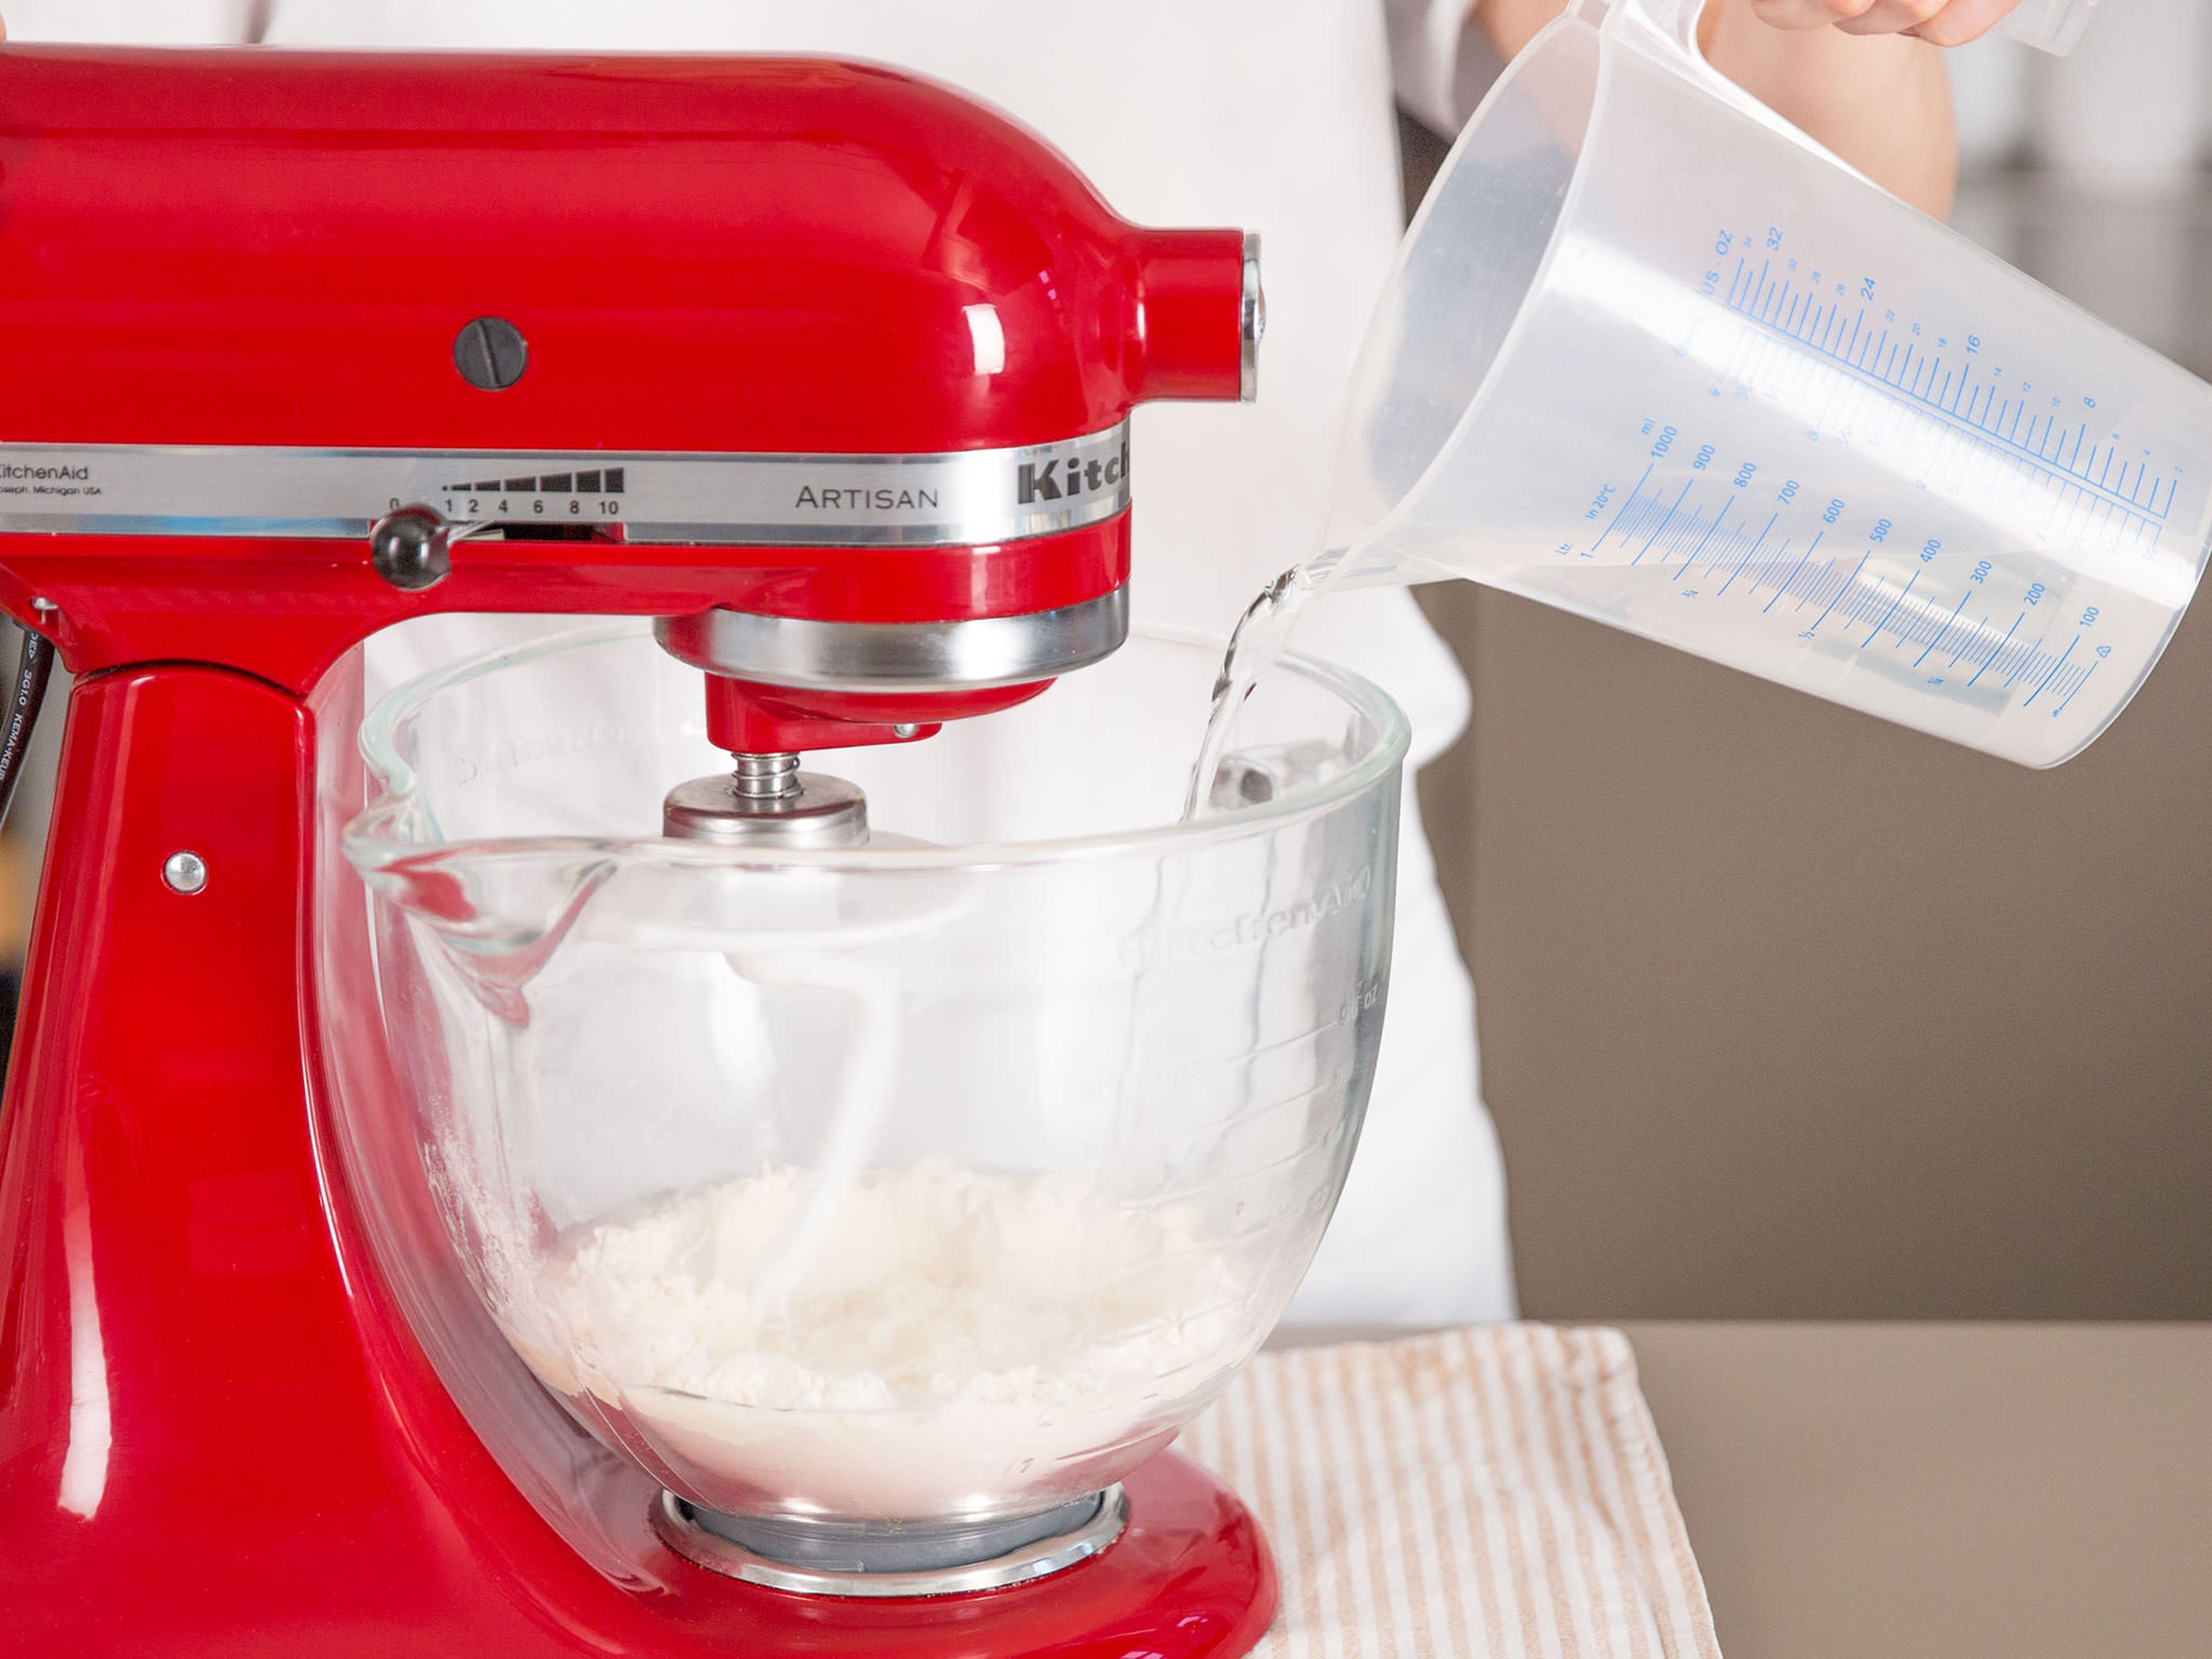 Add the flour and water to stand mixer and beat for approx. 2 – 3 min. until ingredients are well incorporated.